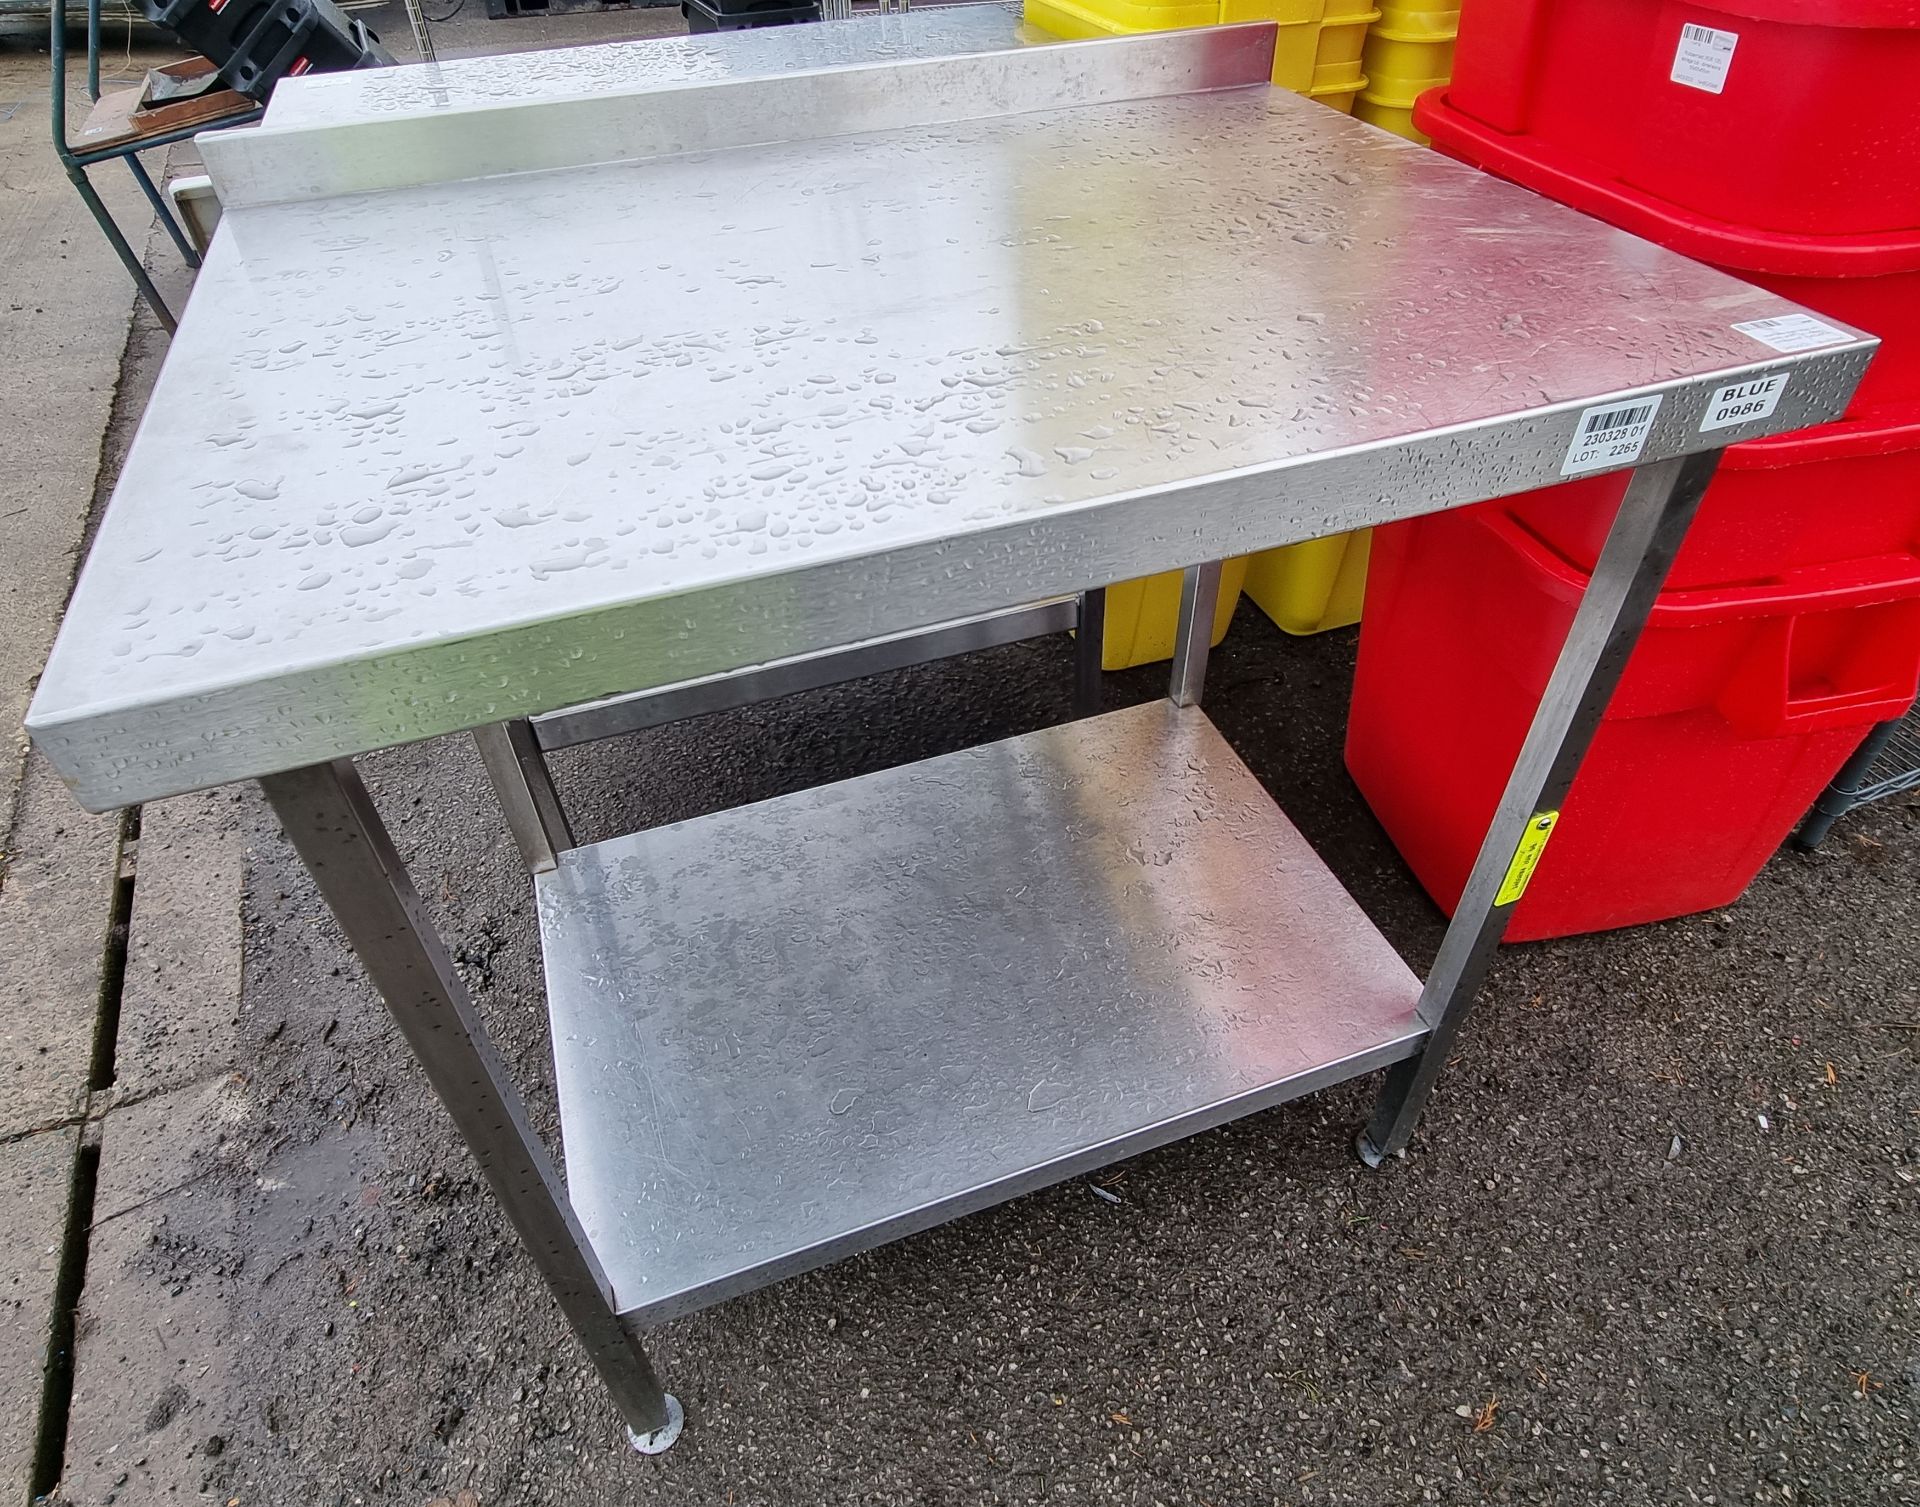 Stainless steel table with bottom shelf and upstand - dimensions: 90 x 65 x 95cm